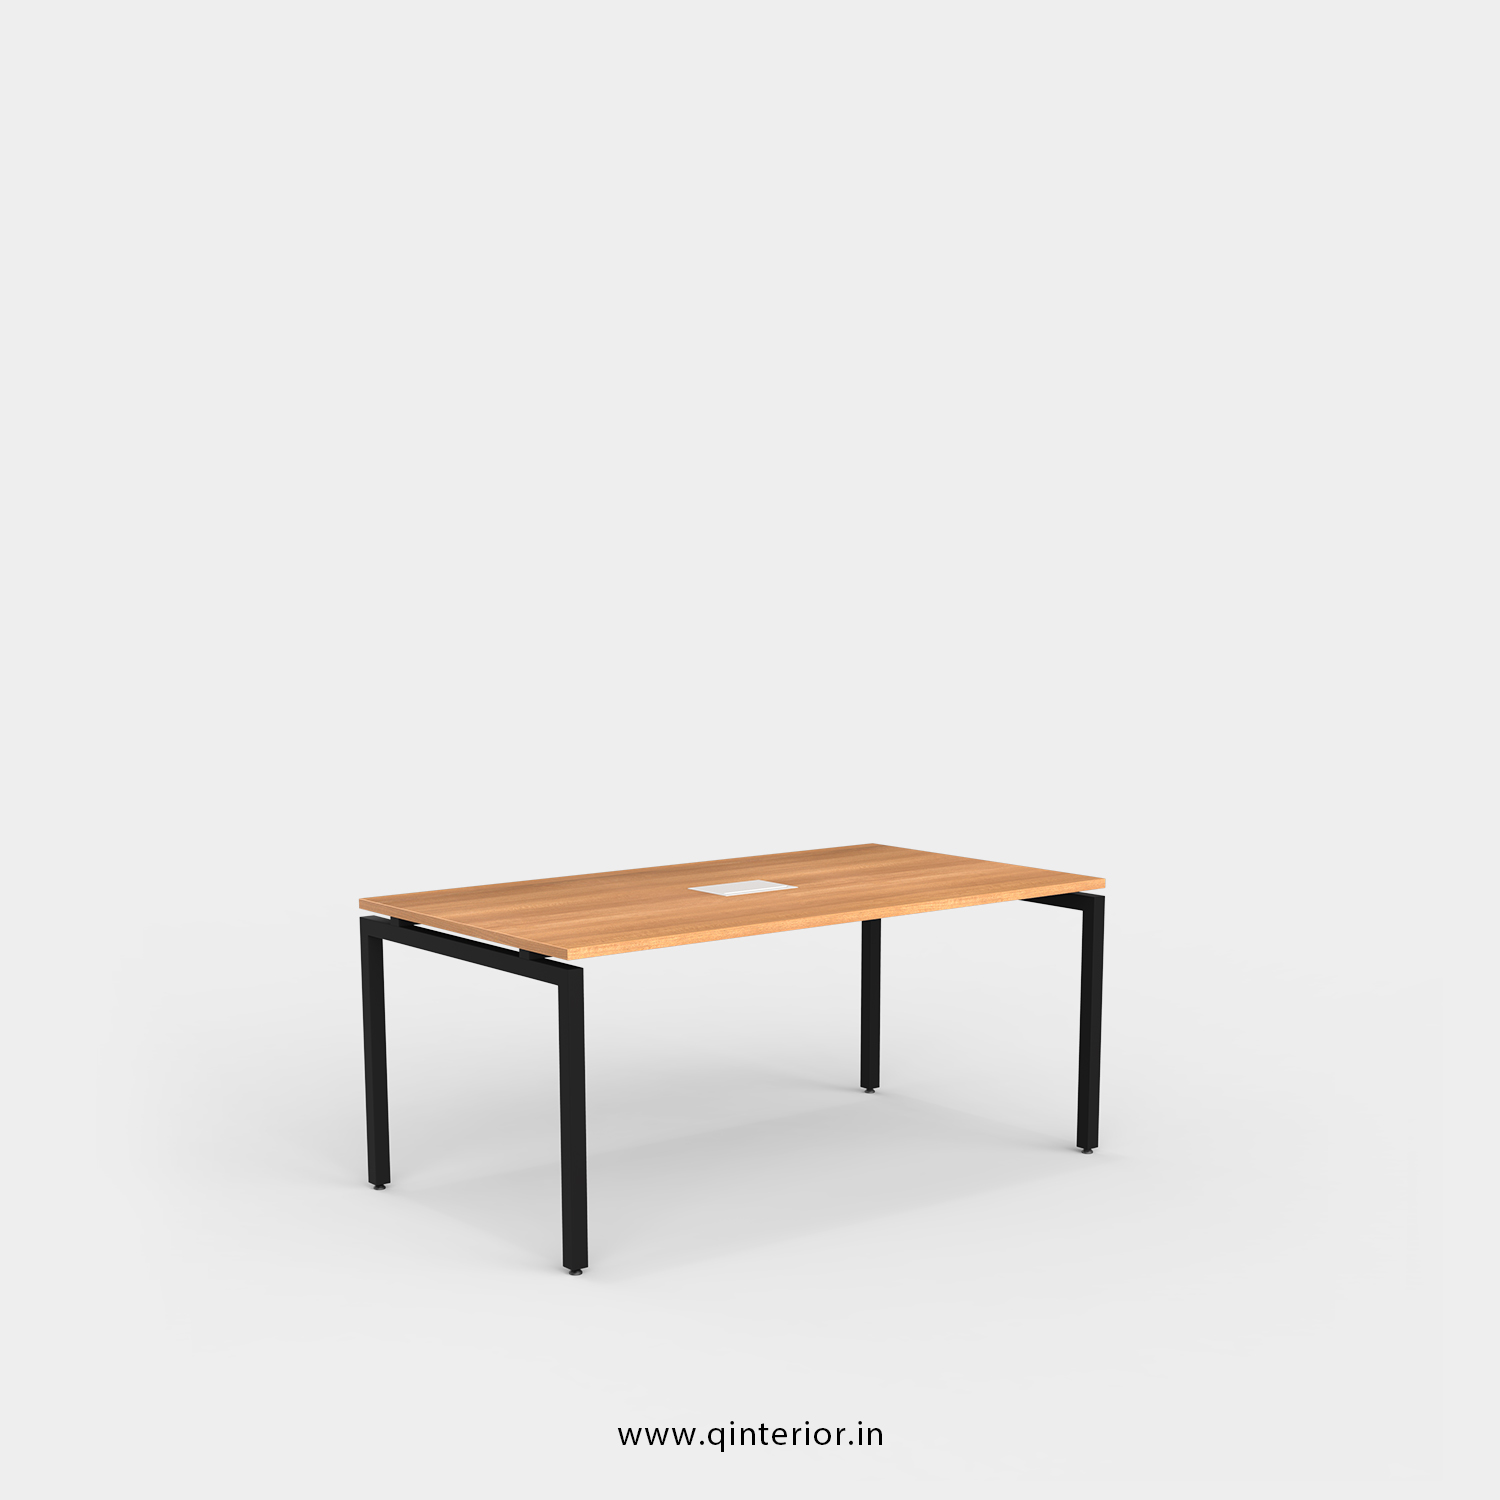 Montel Meeting Table in Oak Finish – OMT001 C2